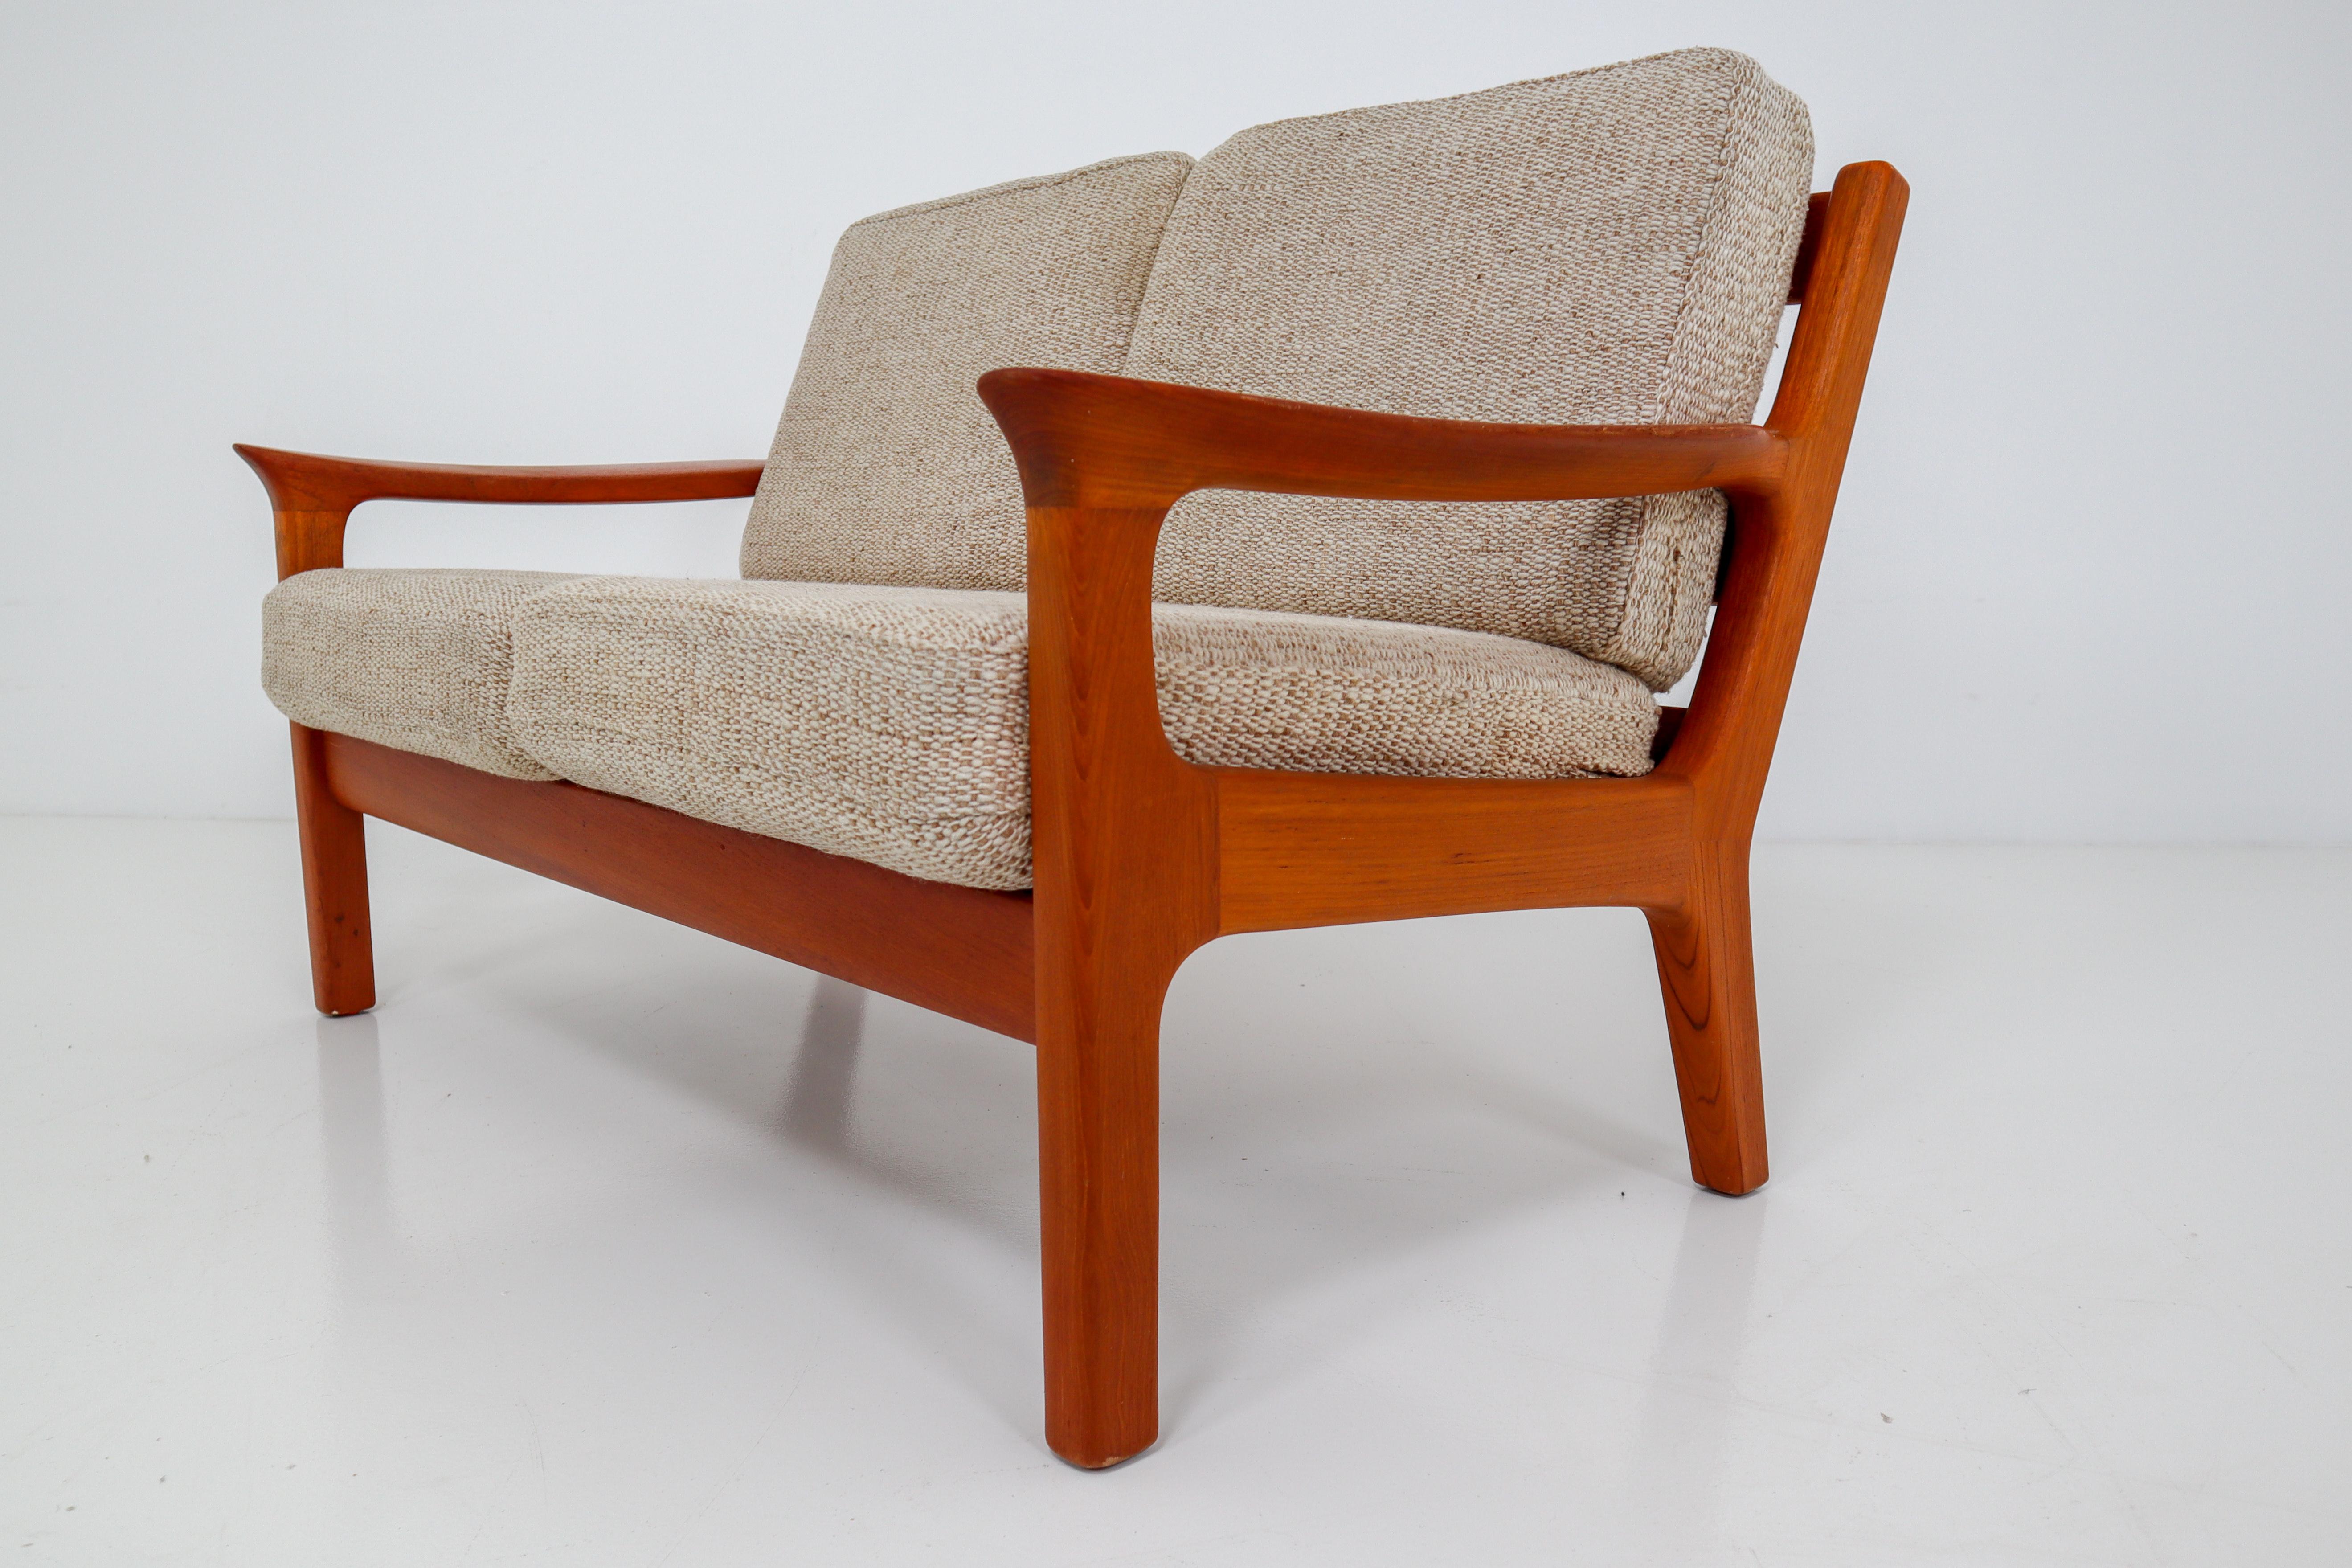 Two-seat sofa in solid teak and cushions designed by the Danish designer Juul Kristensen and manufactured by Glostrup Furniture Factory in the 1960s. The cushions are upholstered with a sandy colored high quality original fabric. The teak wooden